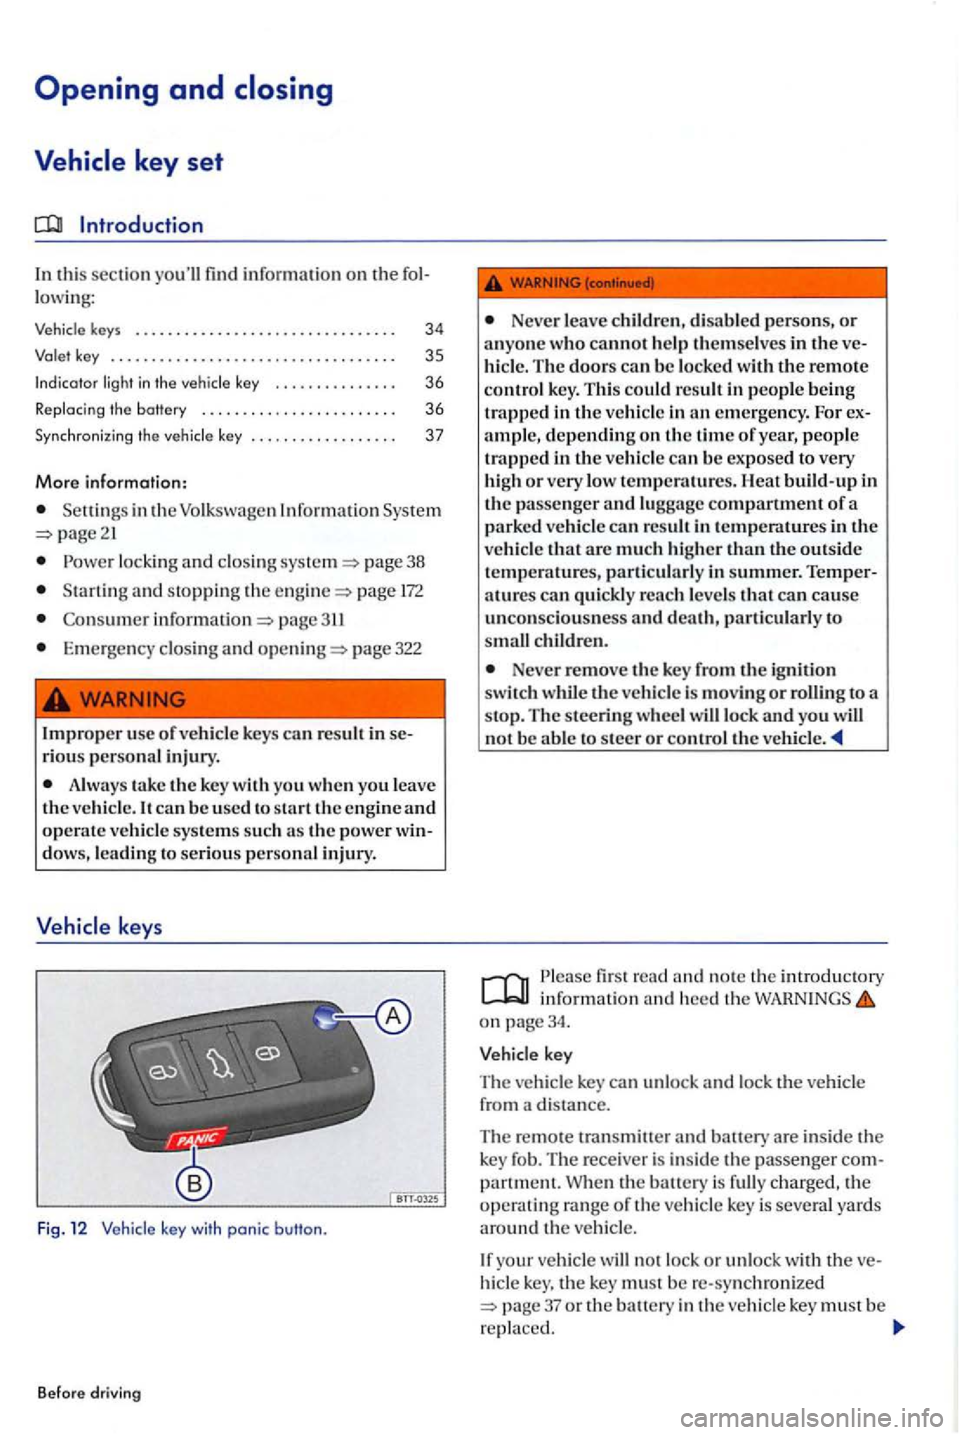 VOLKSWAGEN GOLF PLUS 2007  Owners Manual In this  sec tion find informa tion on th e 
key s . . .  . . . .  . . .  . . . . . . . 
. . .  3 5 
Indicator 
.  . . .  . . 36 
R ep lacing  the battery  . . . . .  . . .  . .  . . . . . . .  . . . 